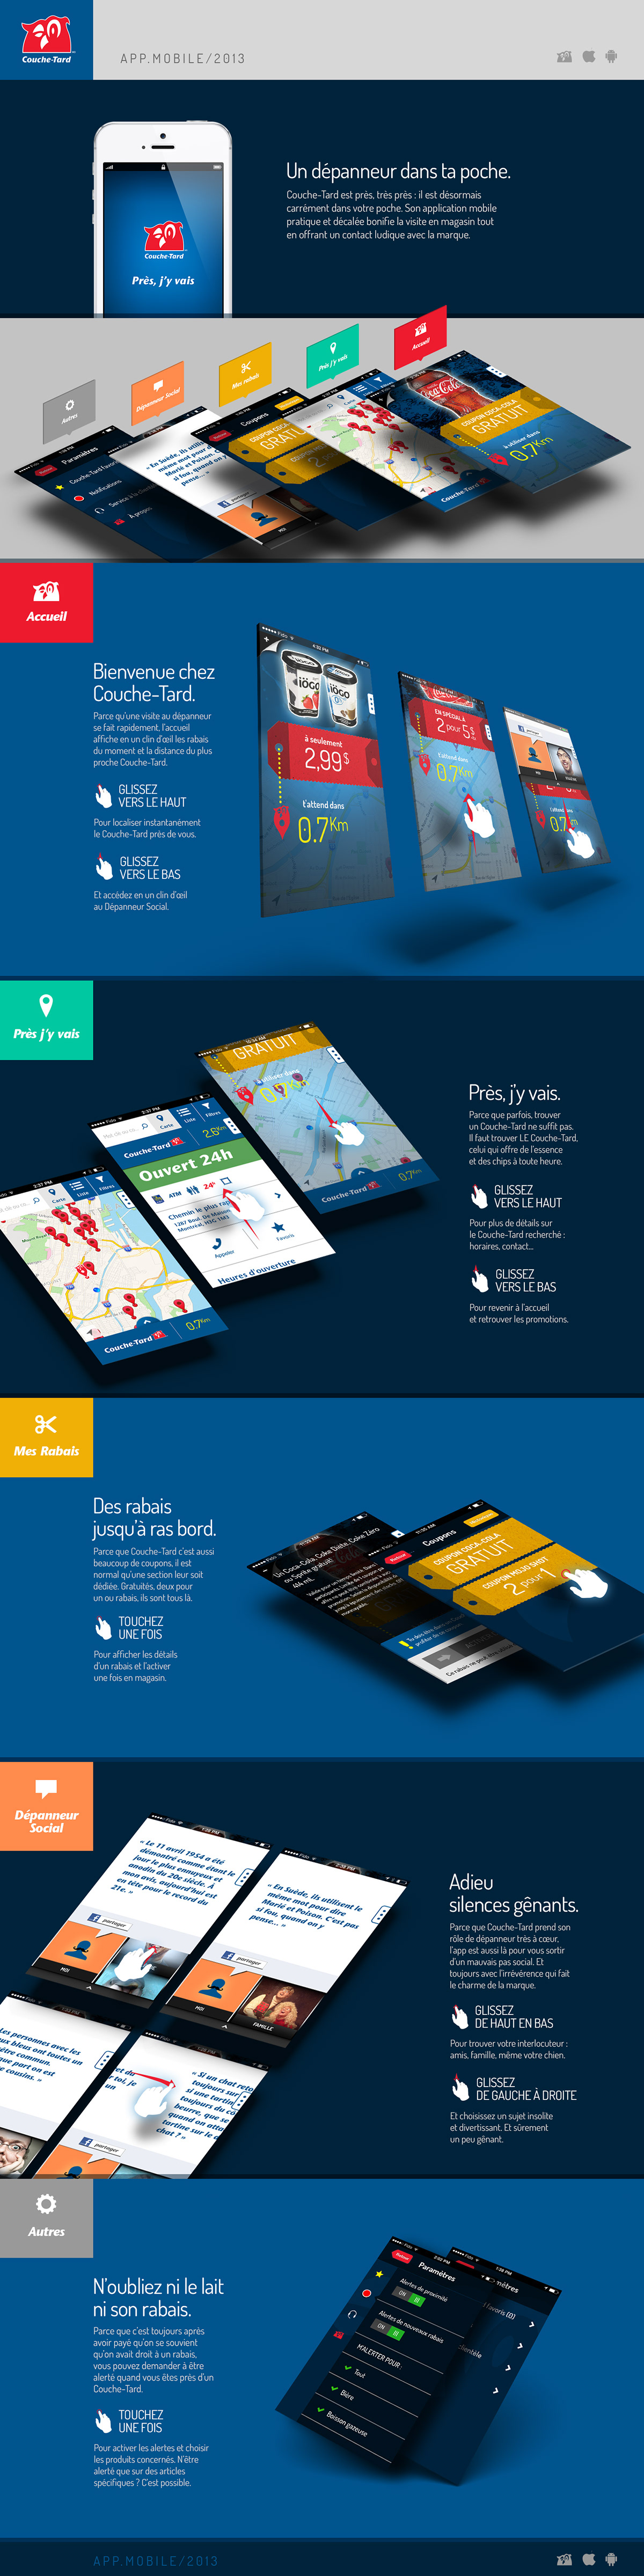 application mobile apple android flat design blue red grey